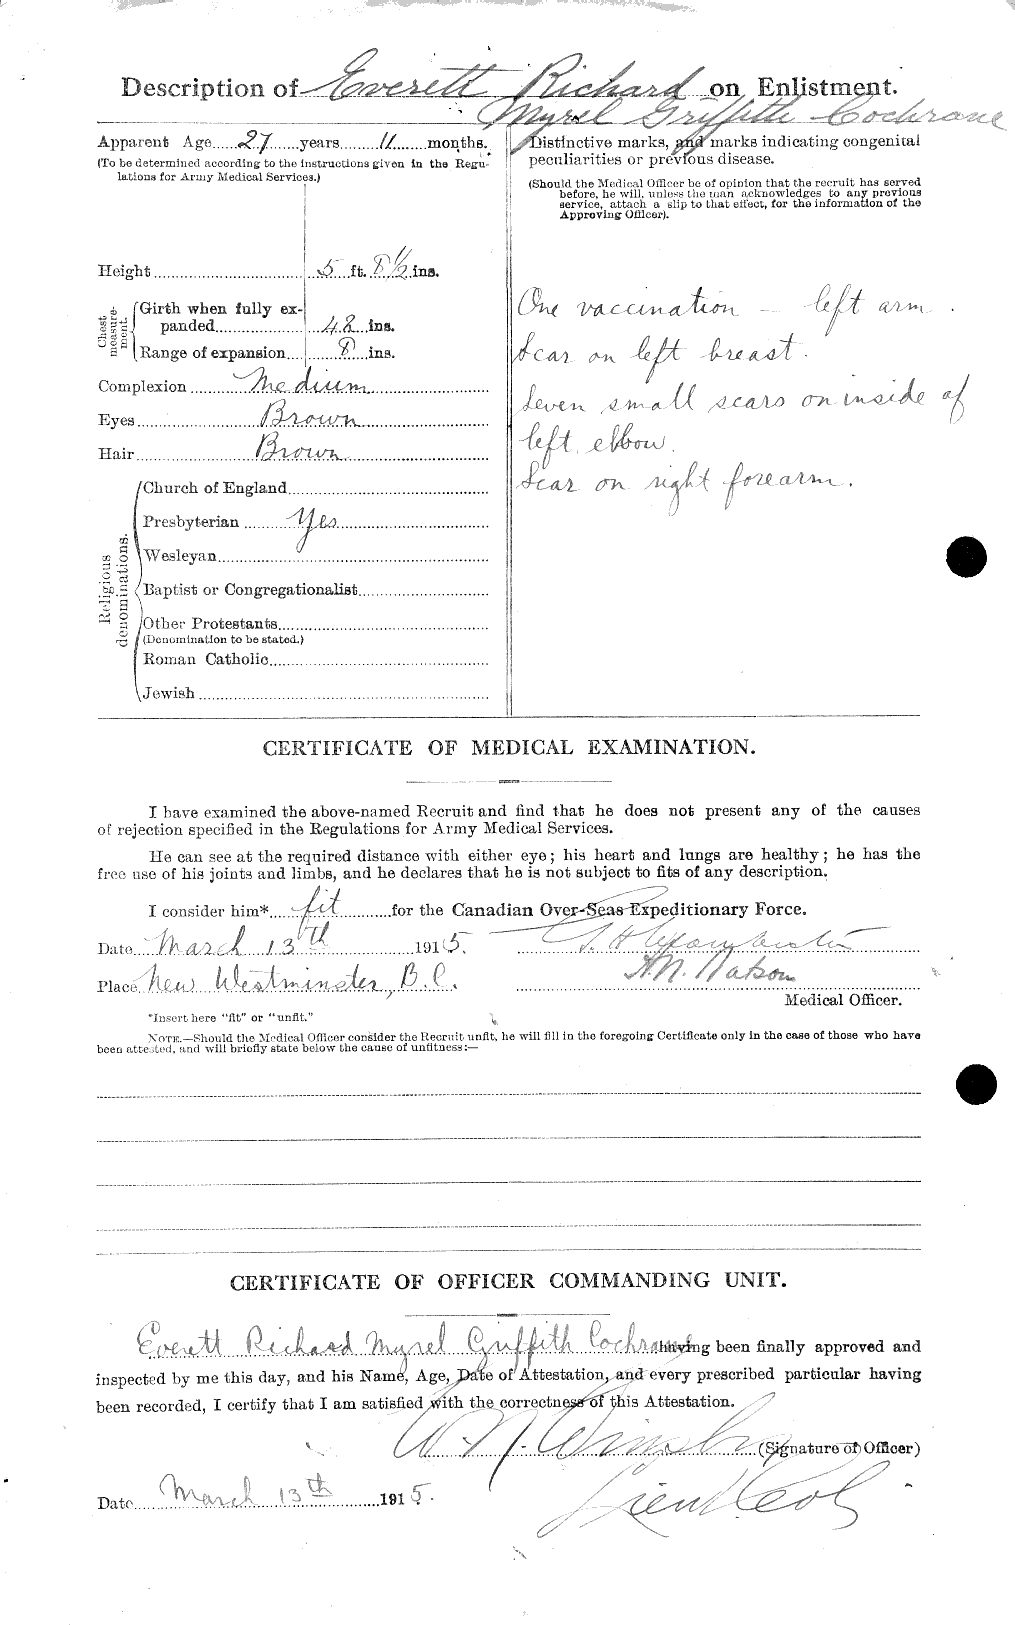 Personnel Records of the First World War - CEF 026340b